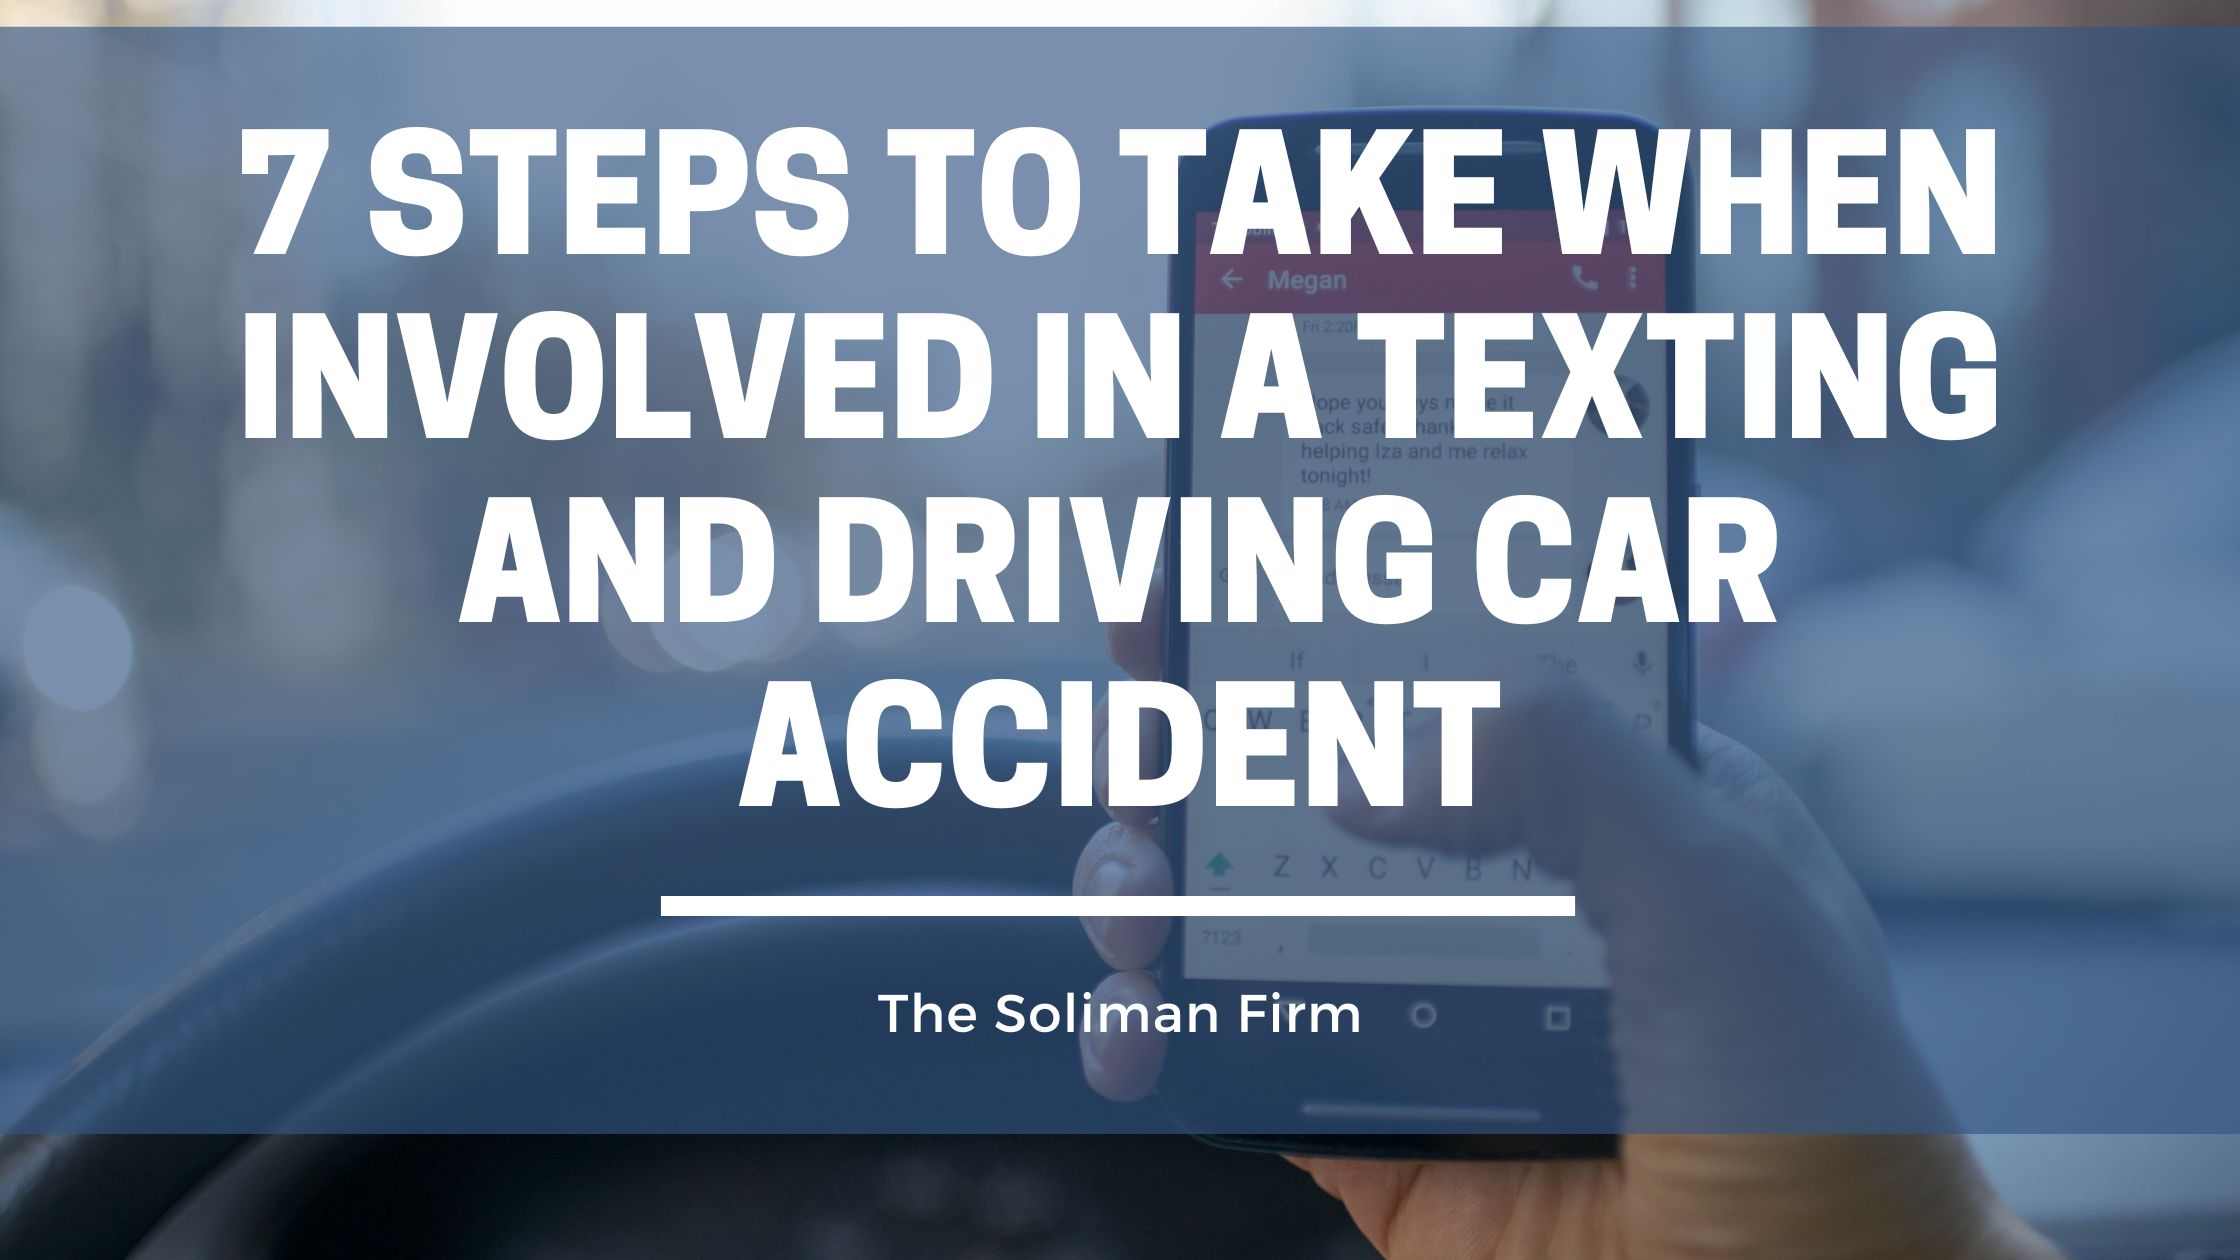 7 Steps to Take When Involved in a Texting And Driving Car Accident